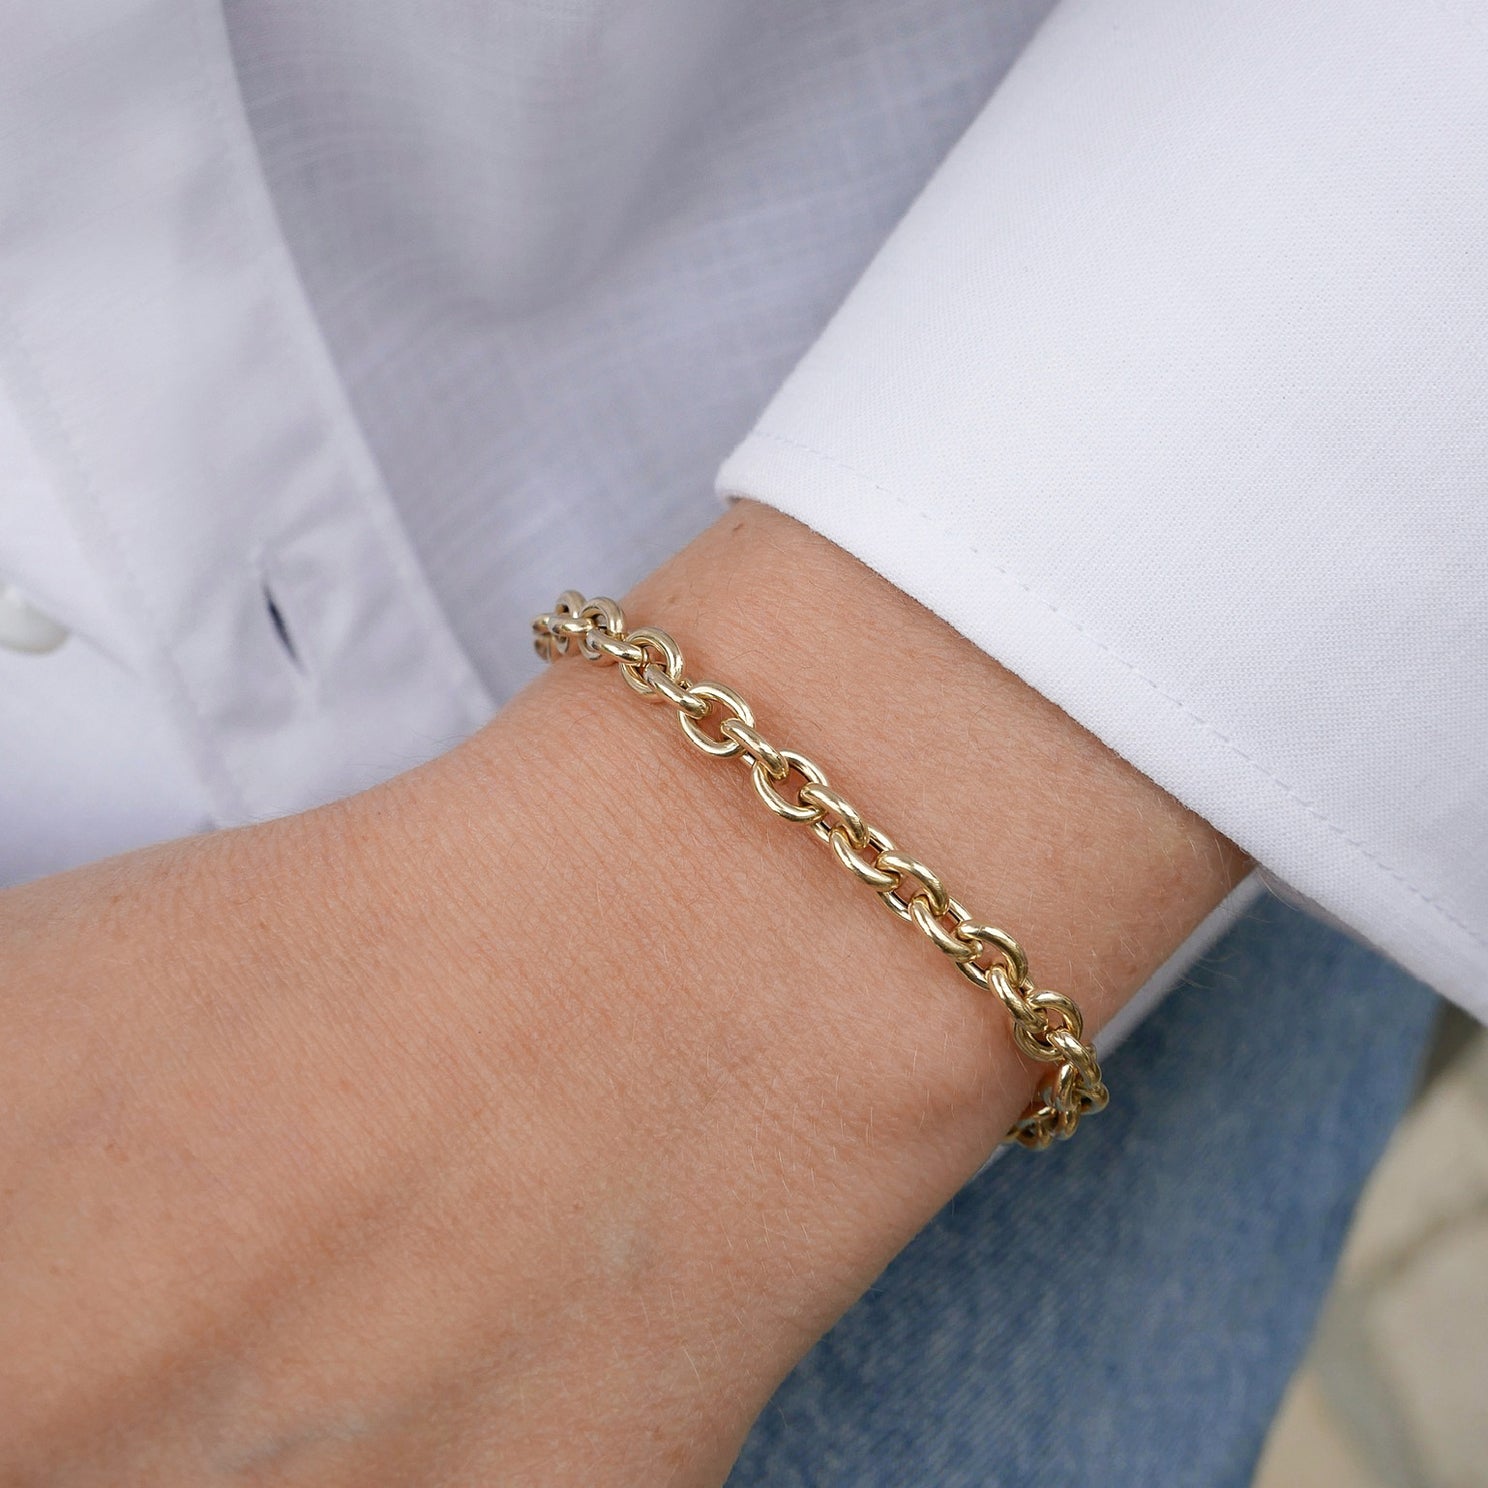 Sienna Chain Bracelet in 14k yellow gold styled on wrist of model in white blouse